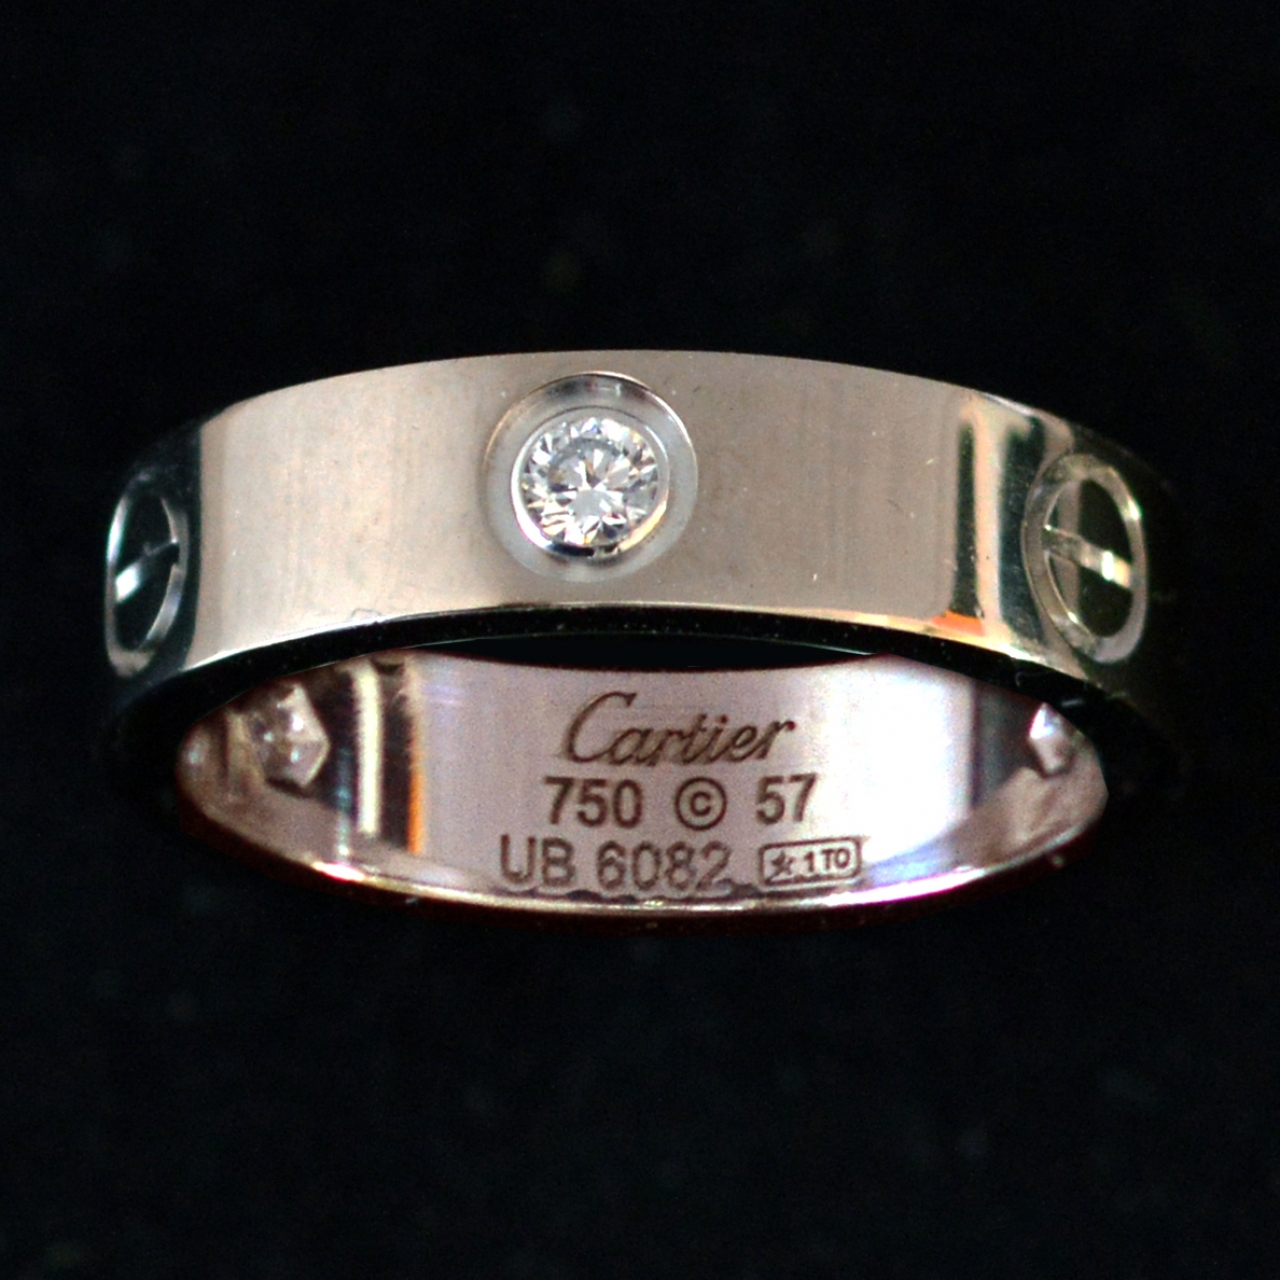 Cartier Ring Price Malaysia - Love diamond wedding band in white gold